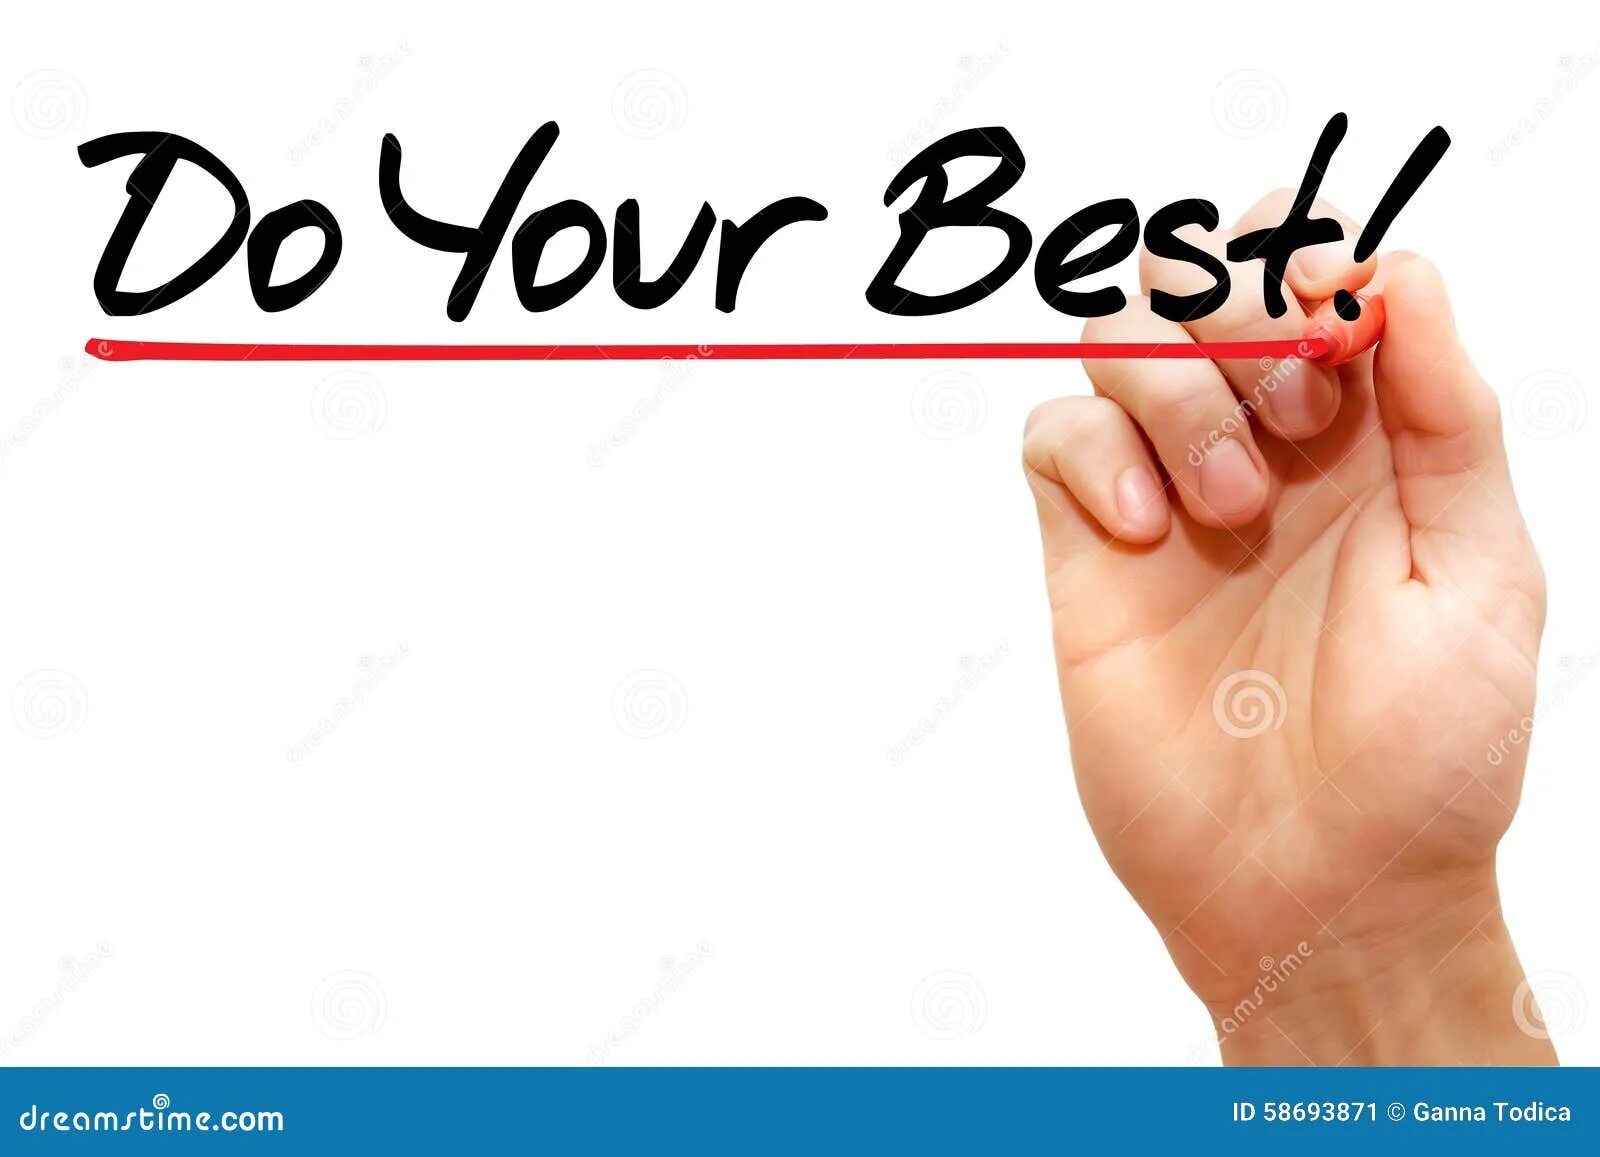 Do your best. Your the best. Do your best на белом фоне. Try your best.